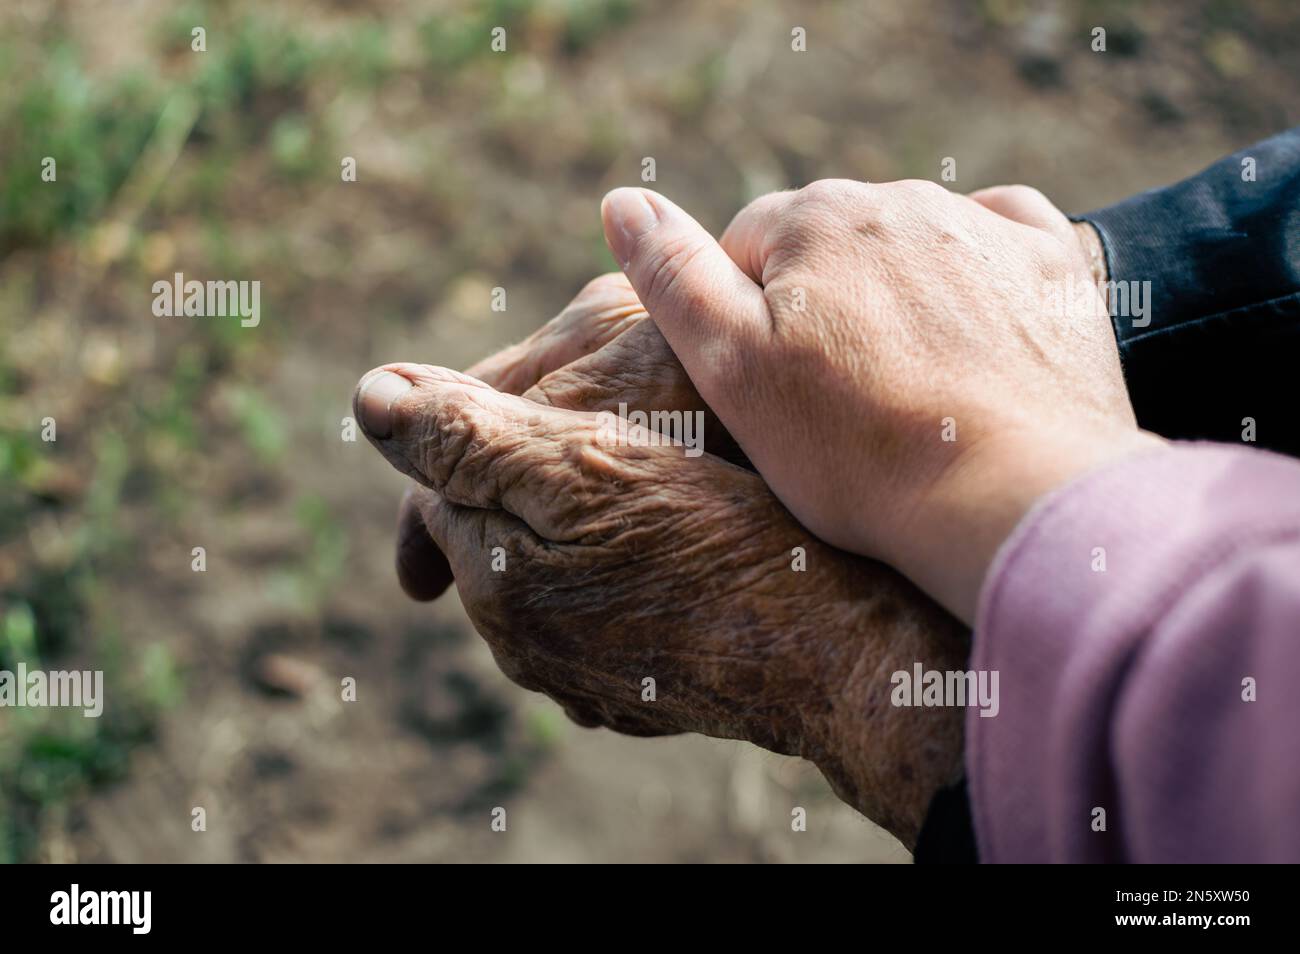 Hands of old grandmother and granddaughter, tenderness and care Stock Photo